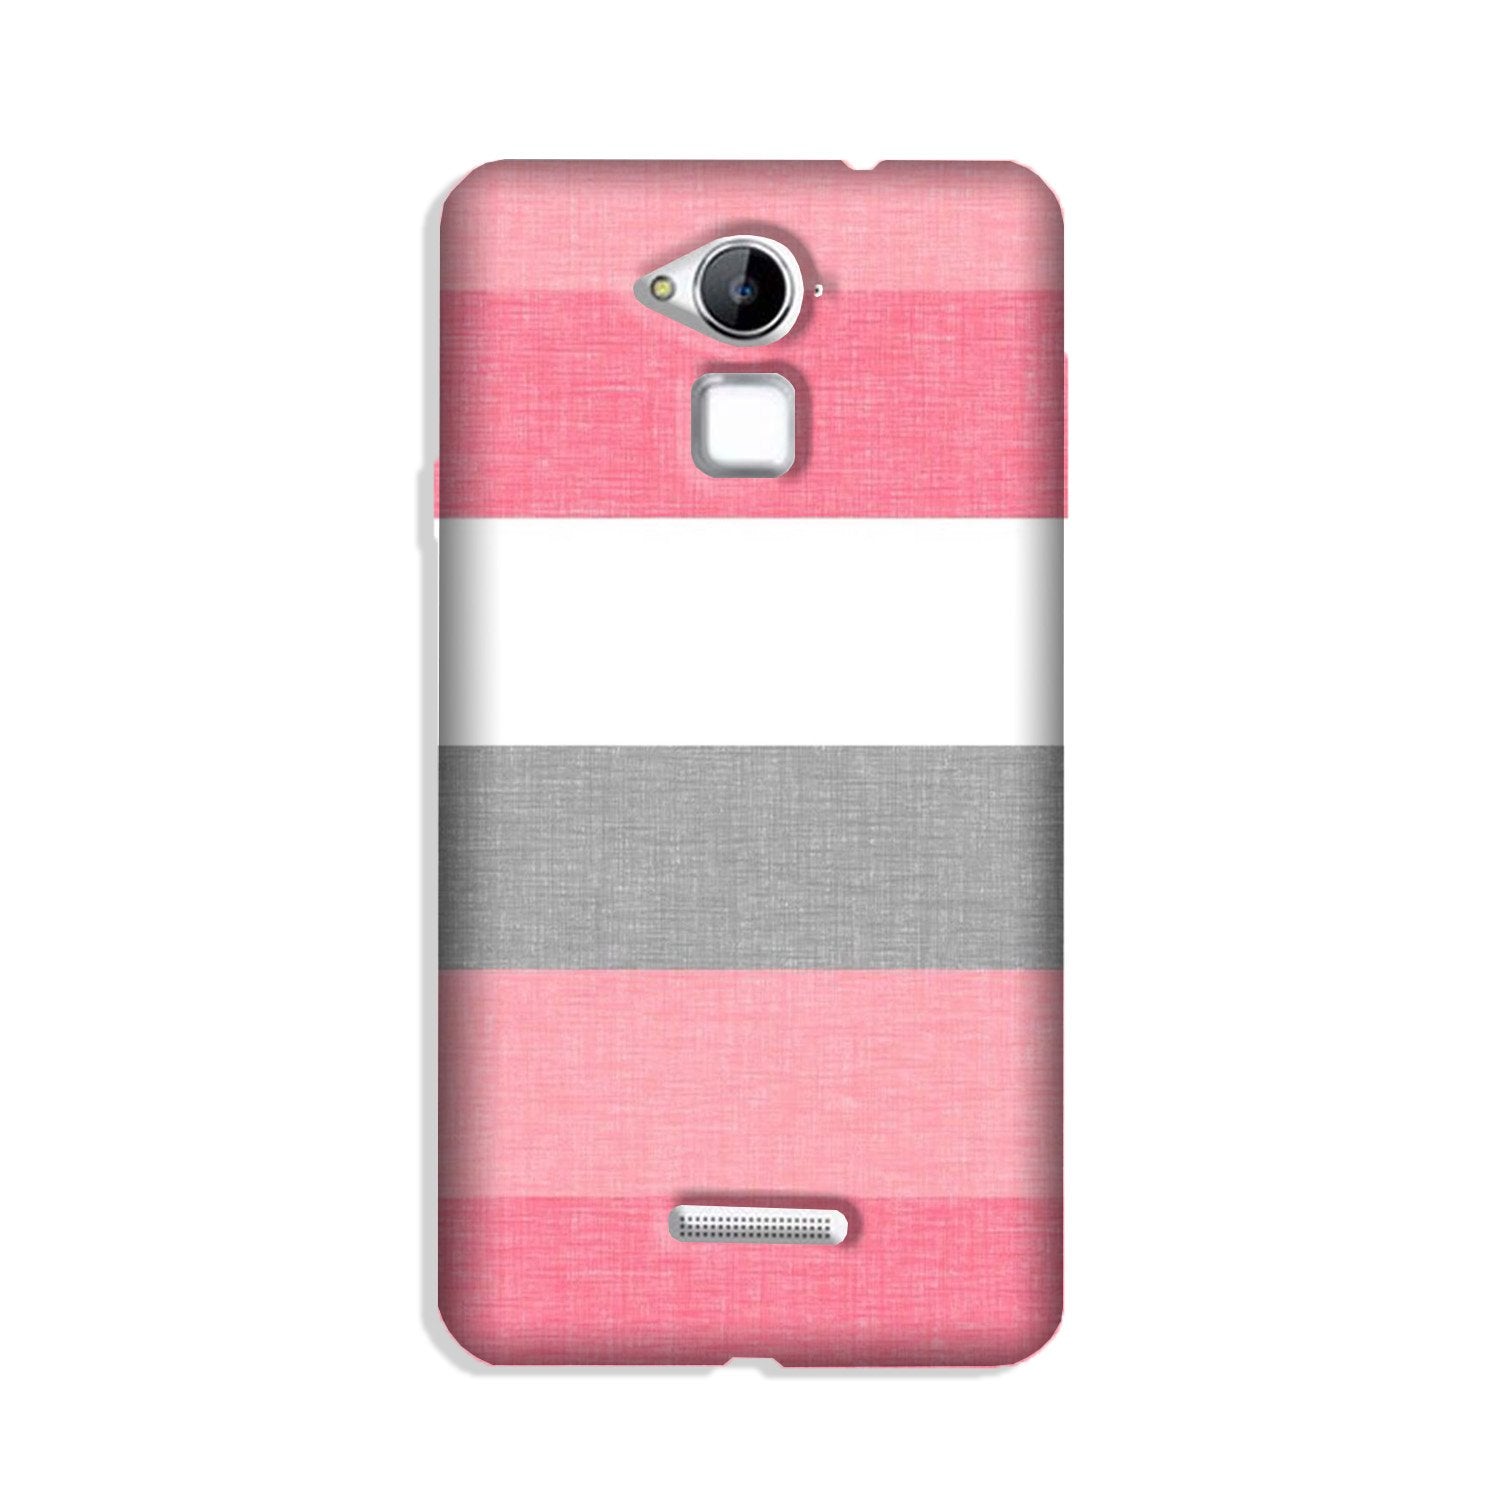 Pink white pattern Case for Coolpad Note 3